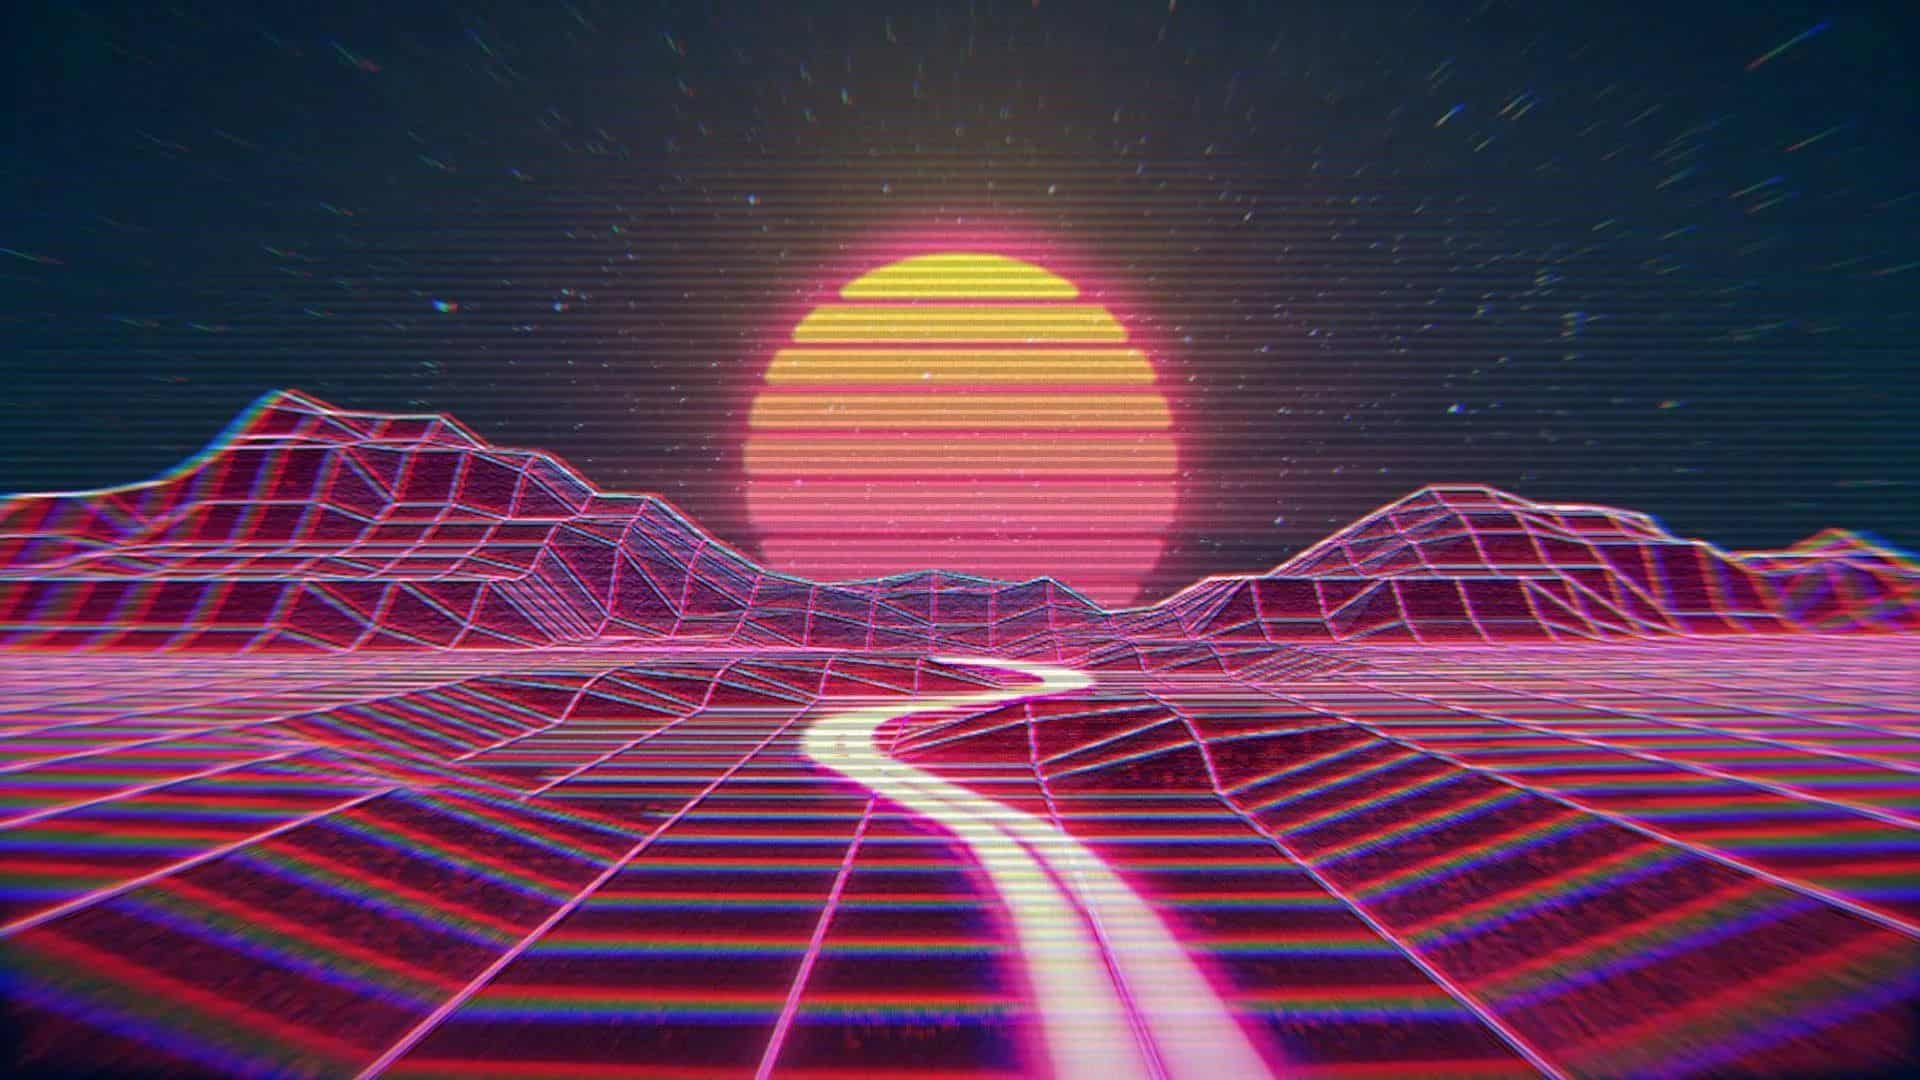 How to make synthwave: a classic Synthwave aesthetic